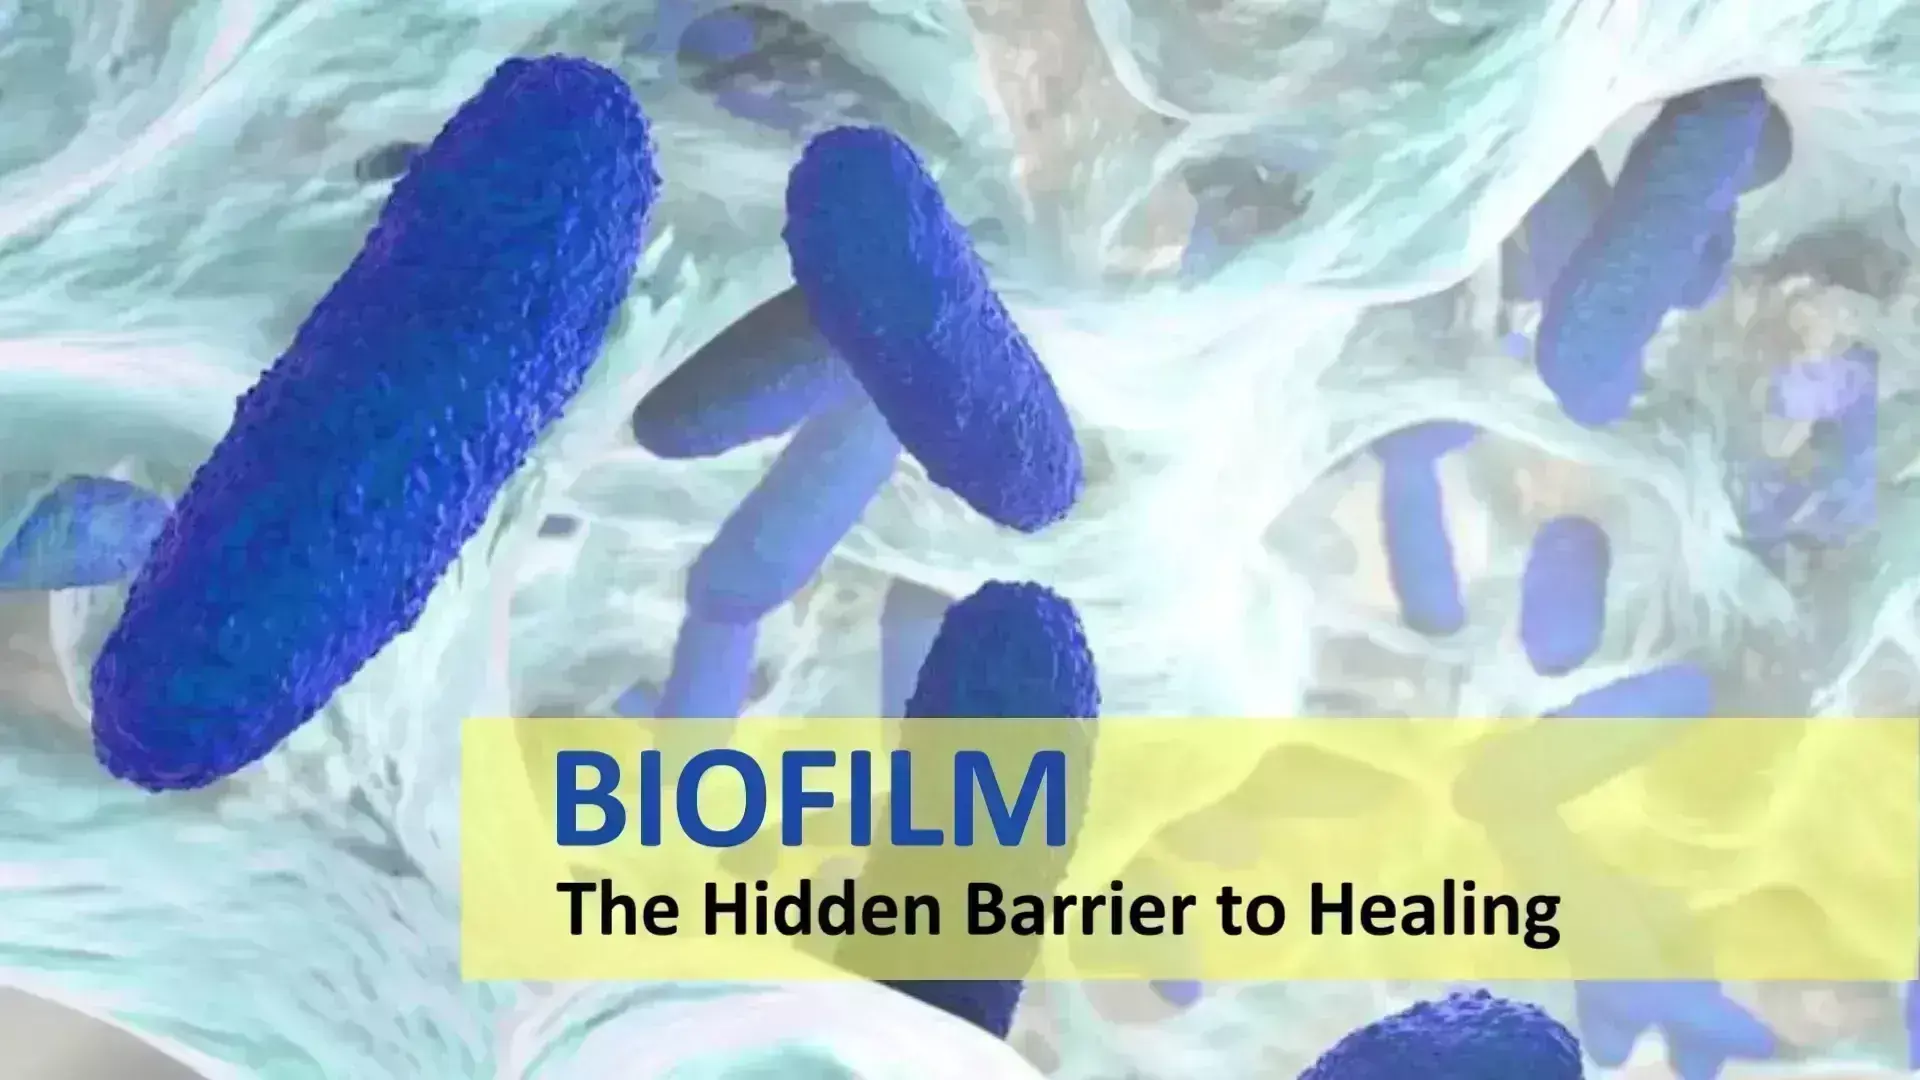 Why do traditional antimicrobials fail to break biofilm?